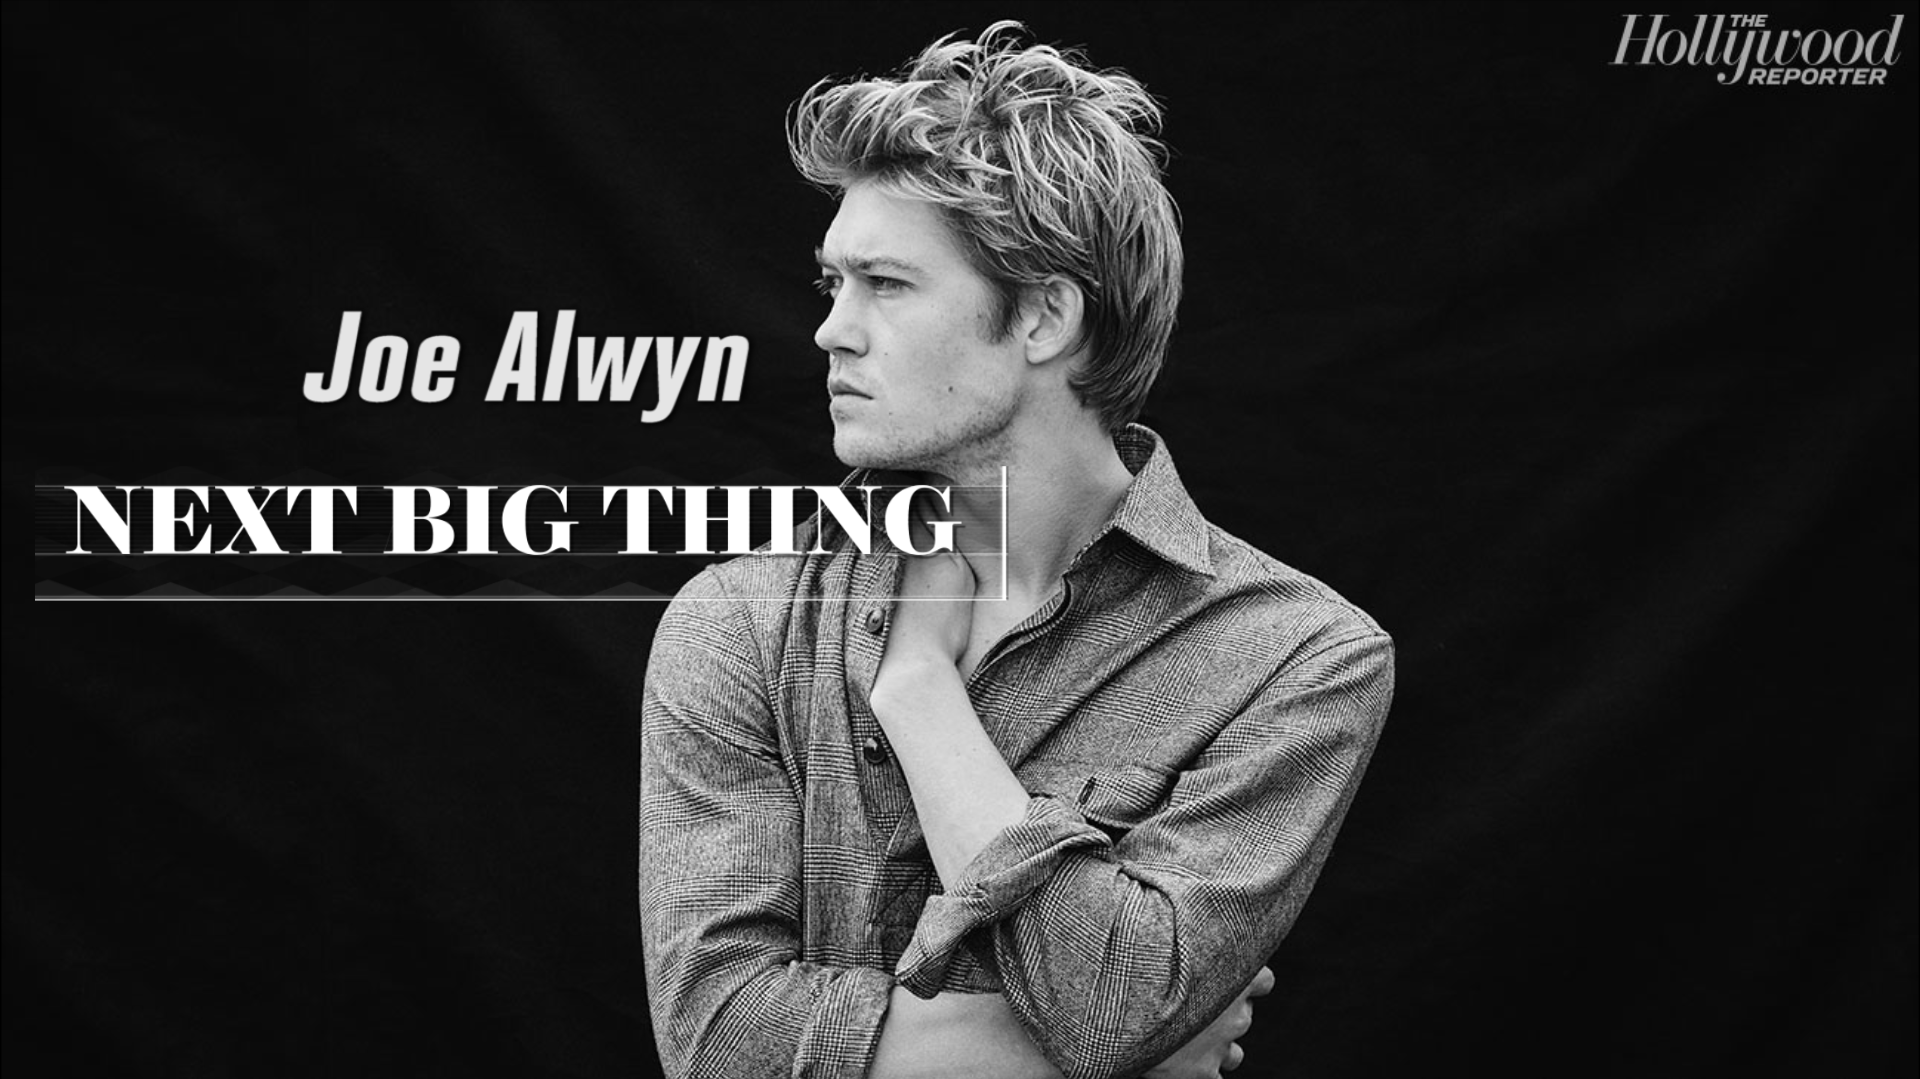 Hollywood S Next Big Thing Joe Alwyn From Film Student To Star